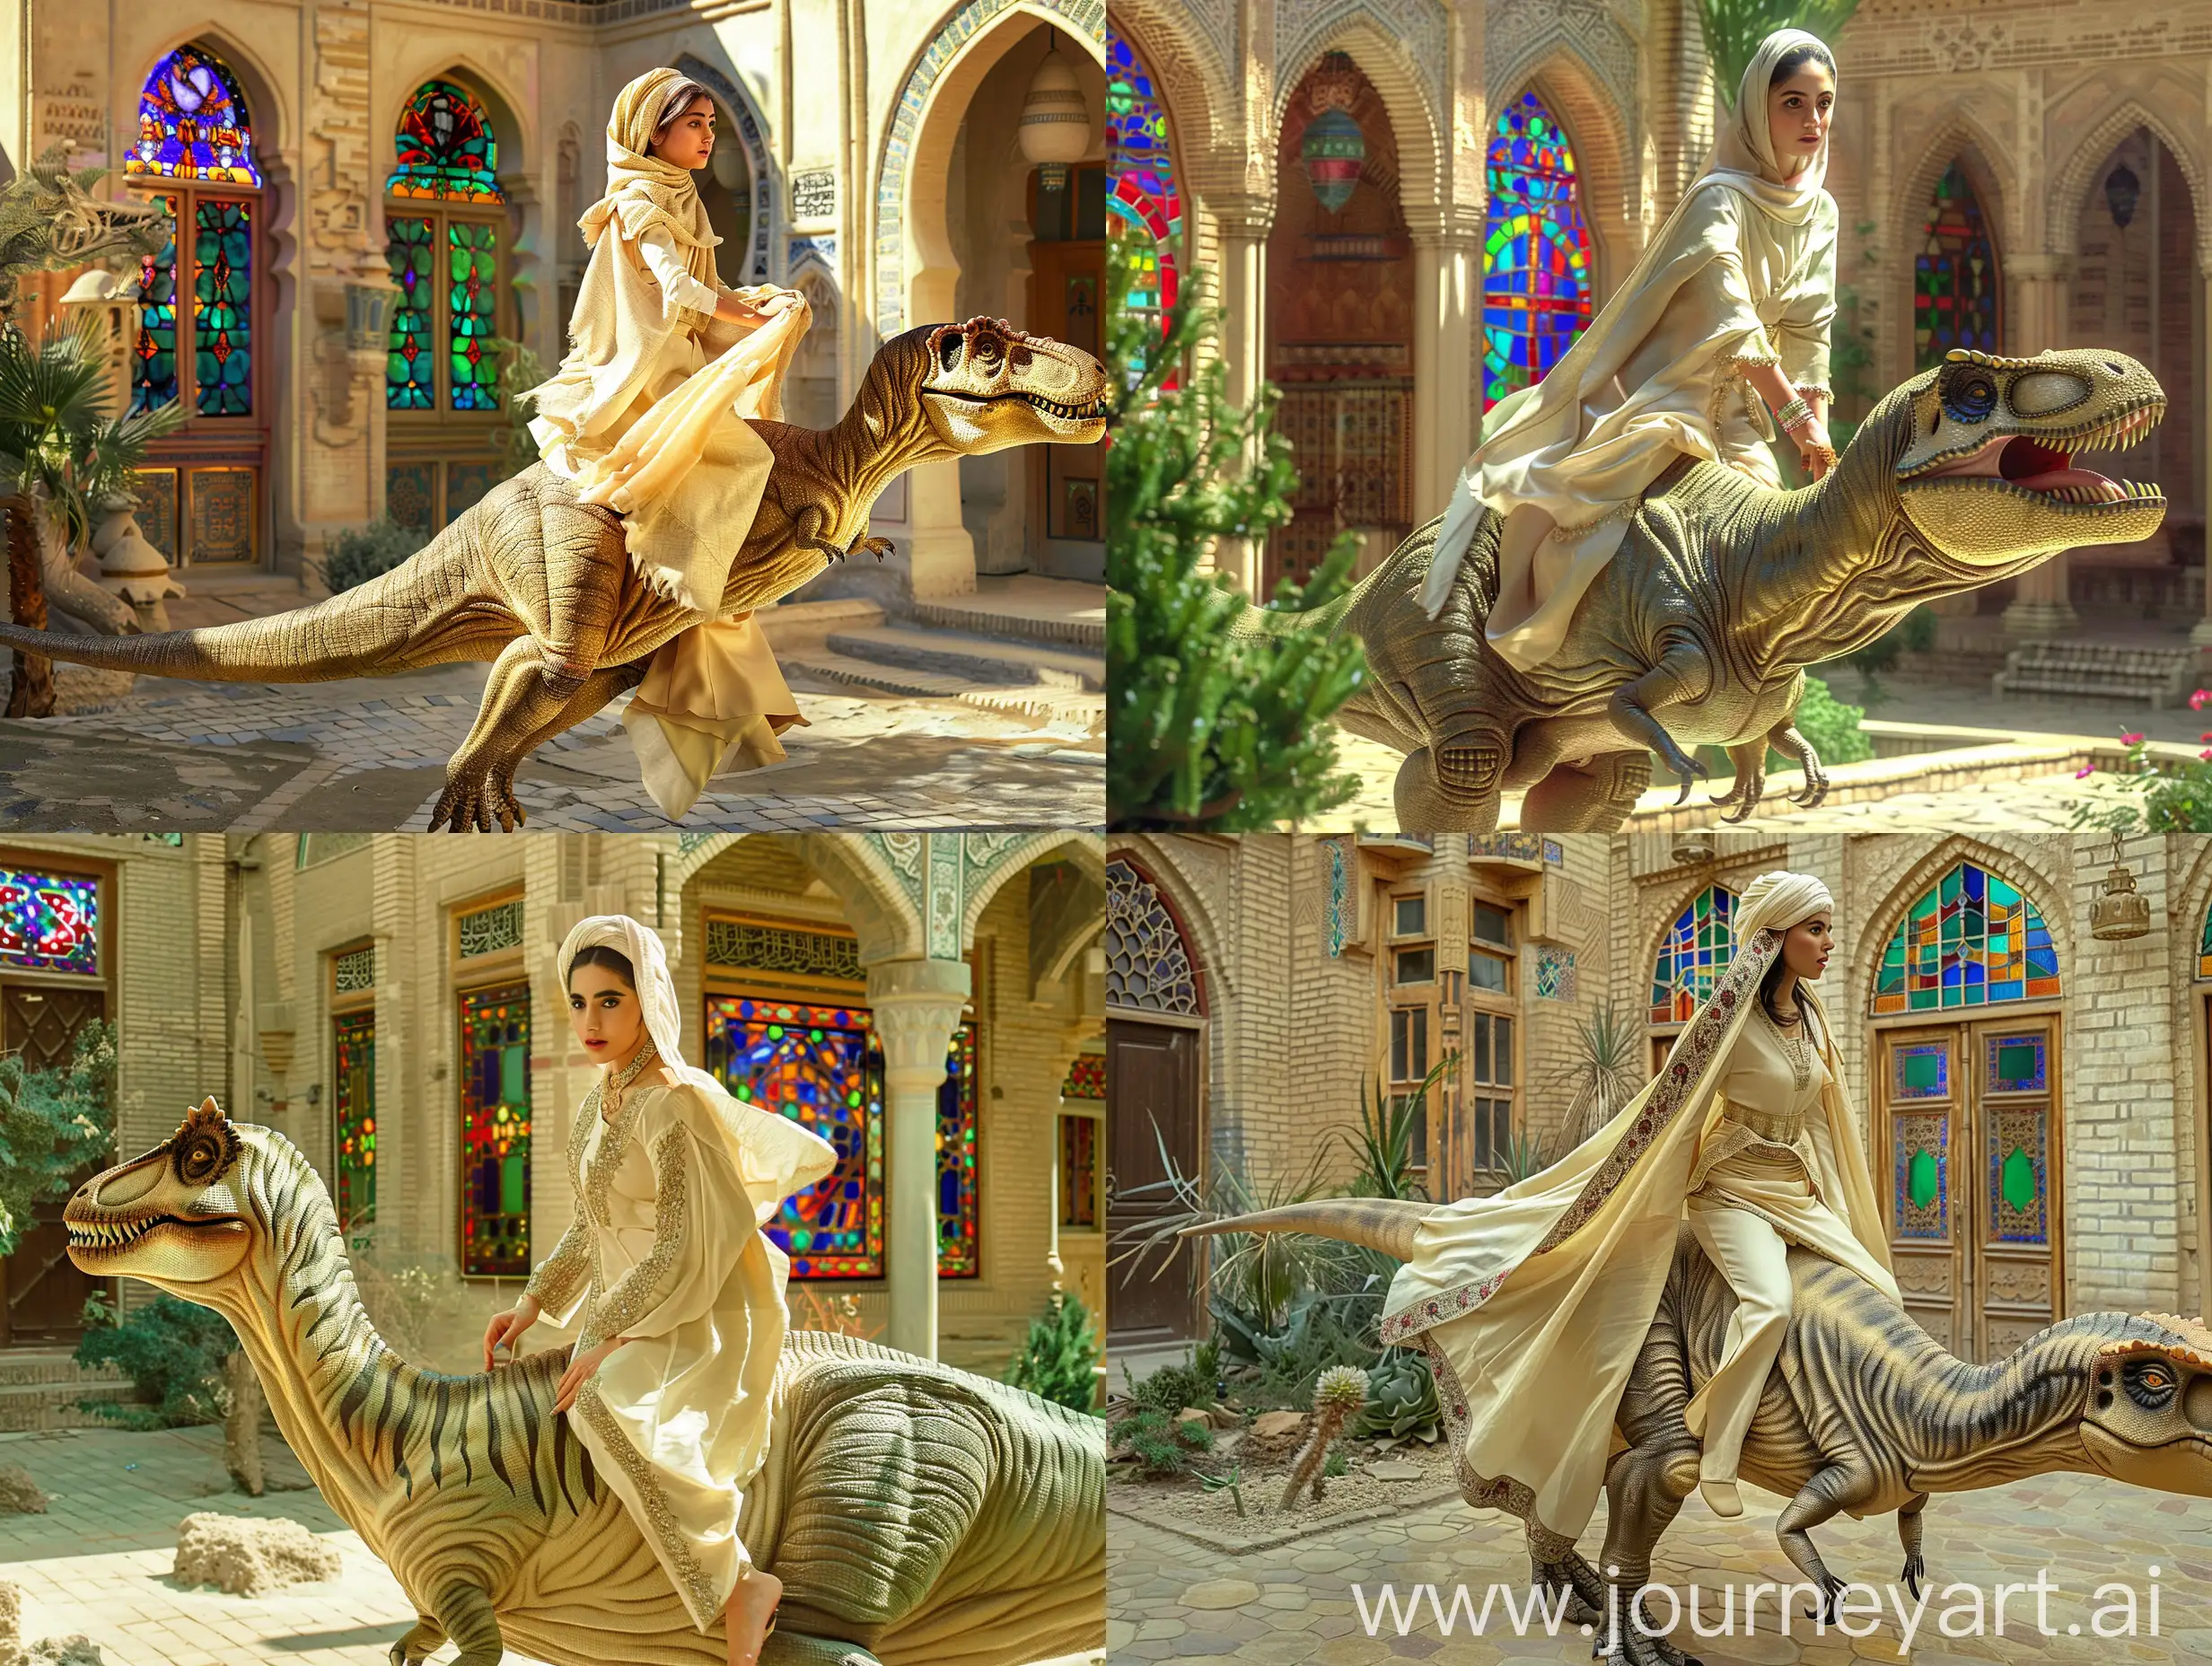 Traditional-Persian-Woman-Riding-Dinosaur-in-Courtyard-with-StainedGlass-Windows